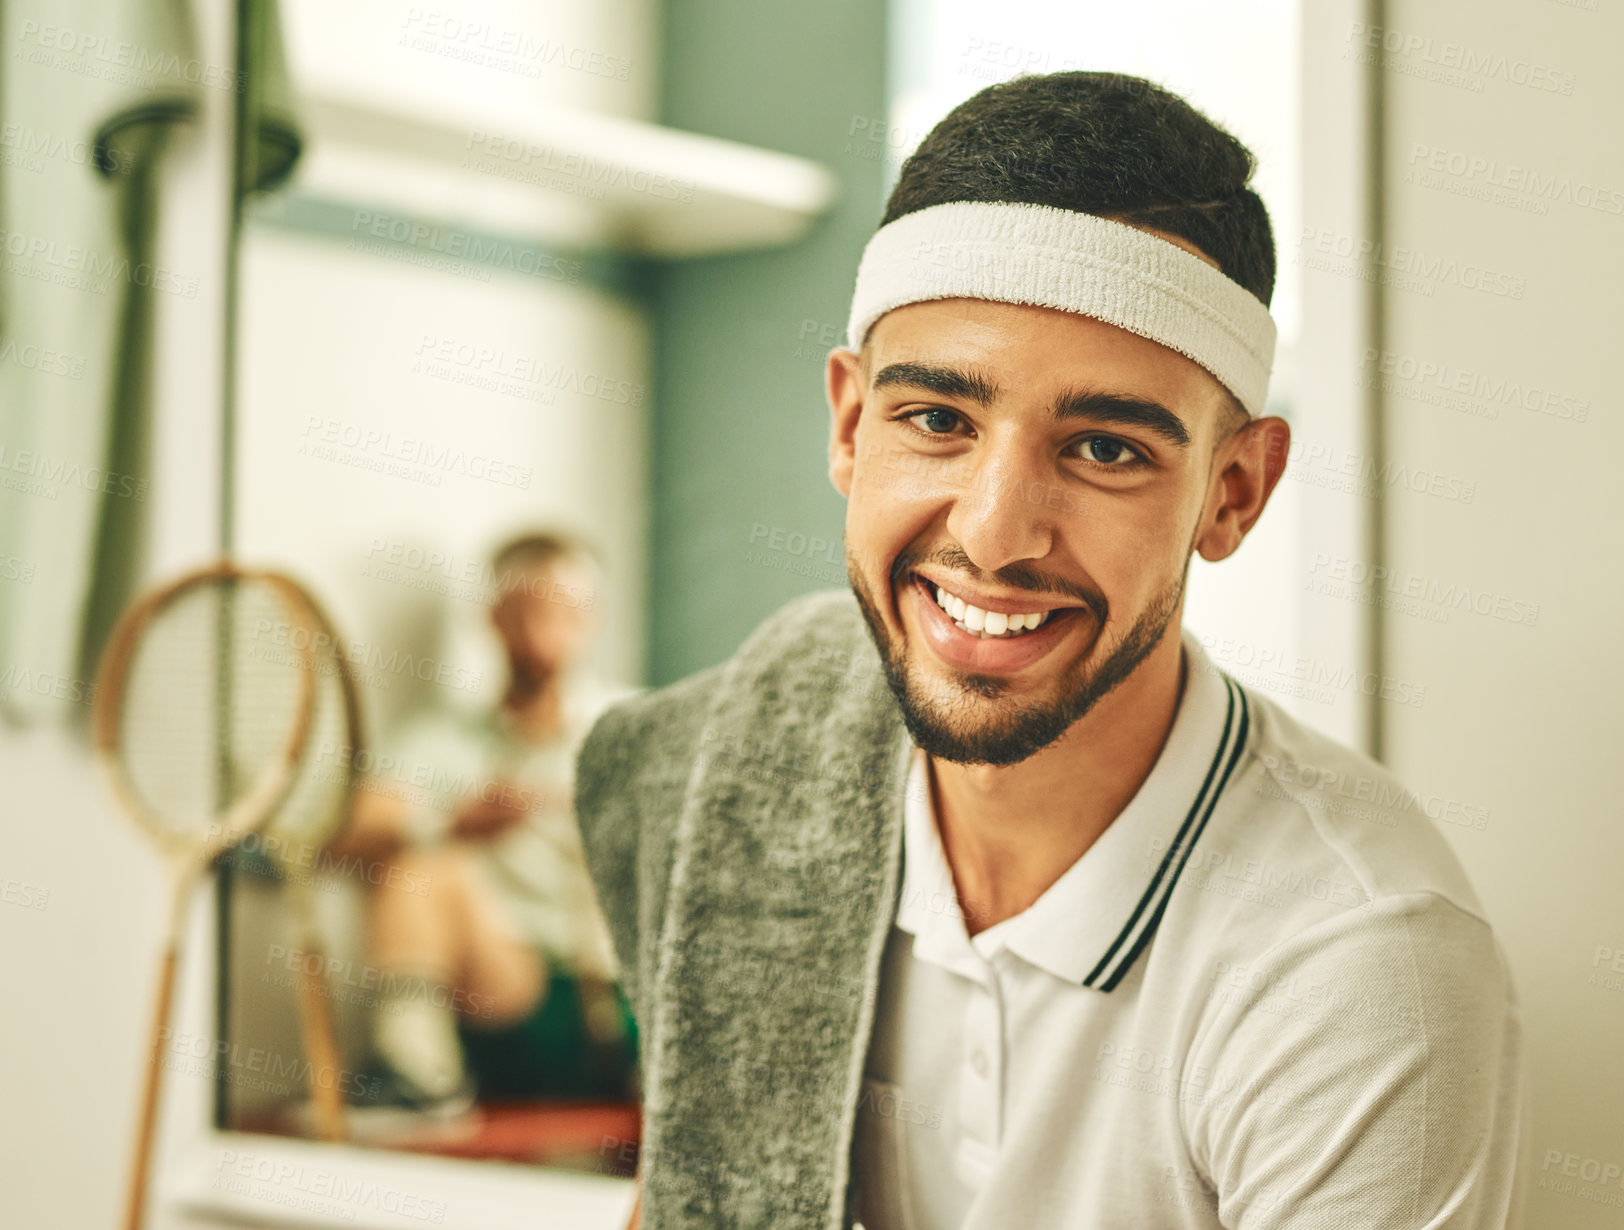 Buy stock photo Shot of a young man taking a break in the locker room after a game of squash